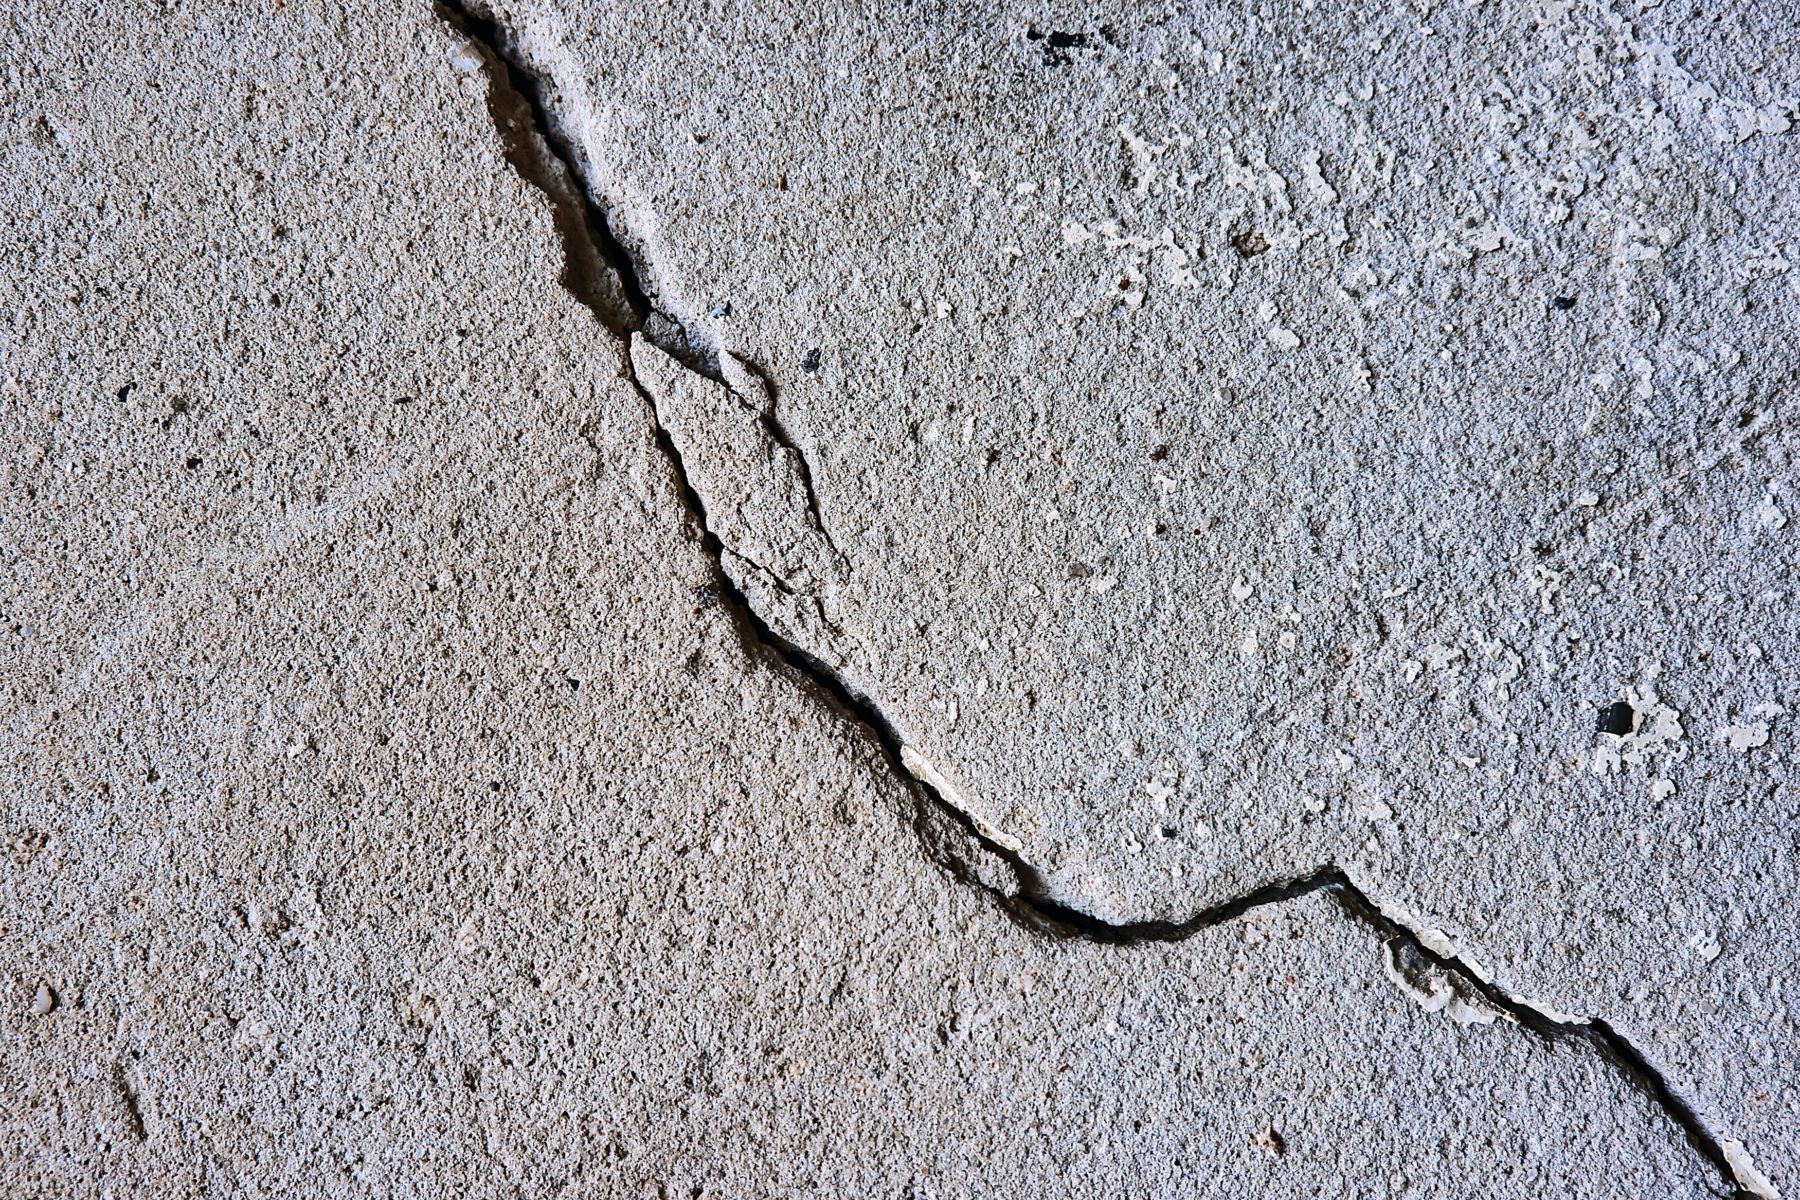 A crack in the ground after an earthquake.